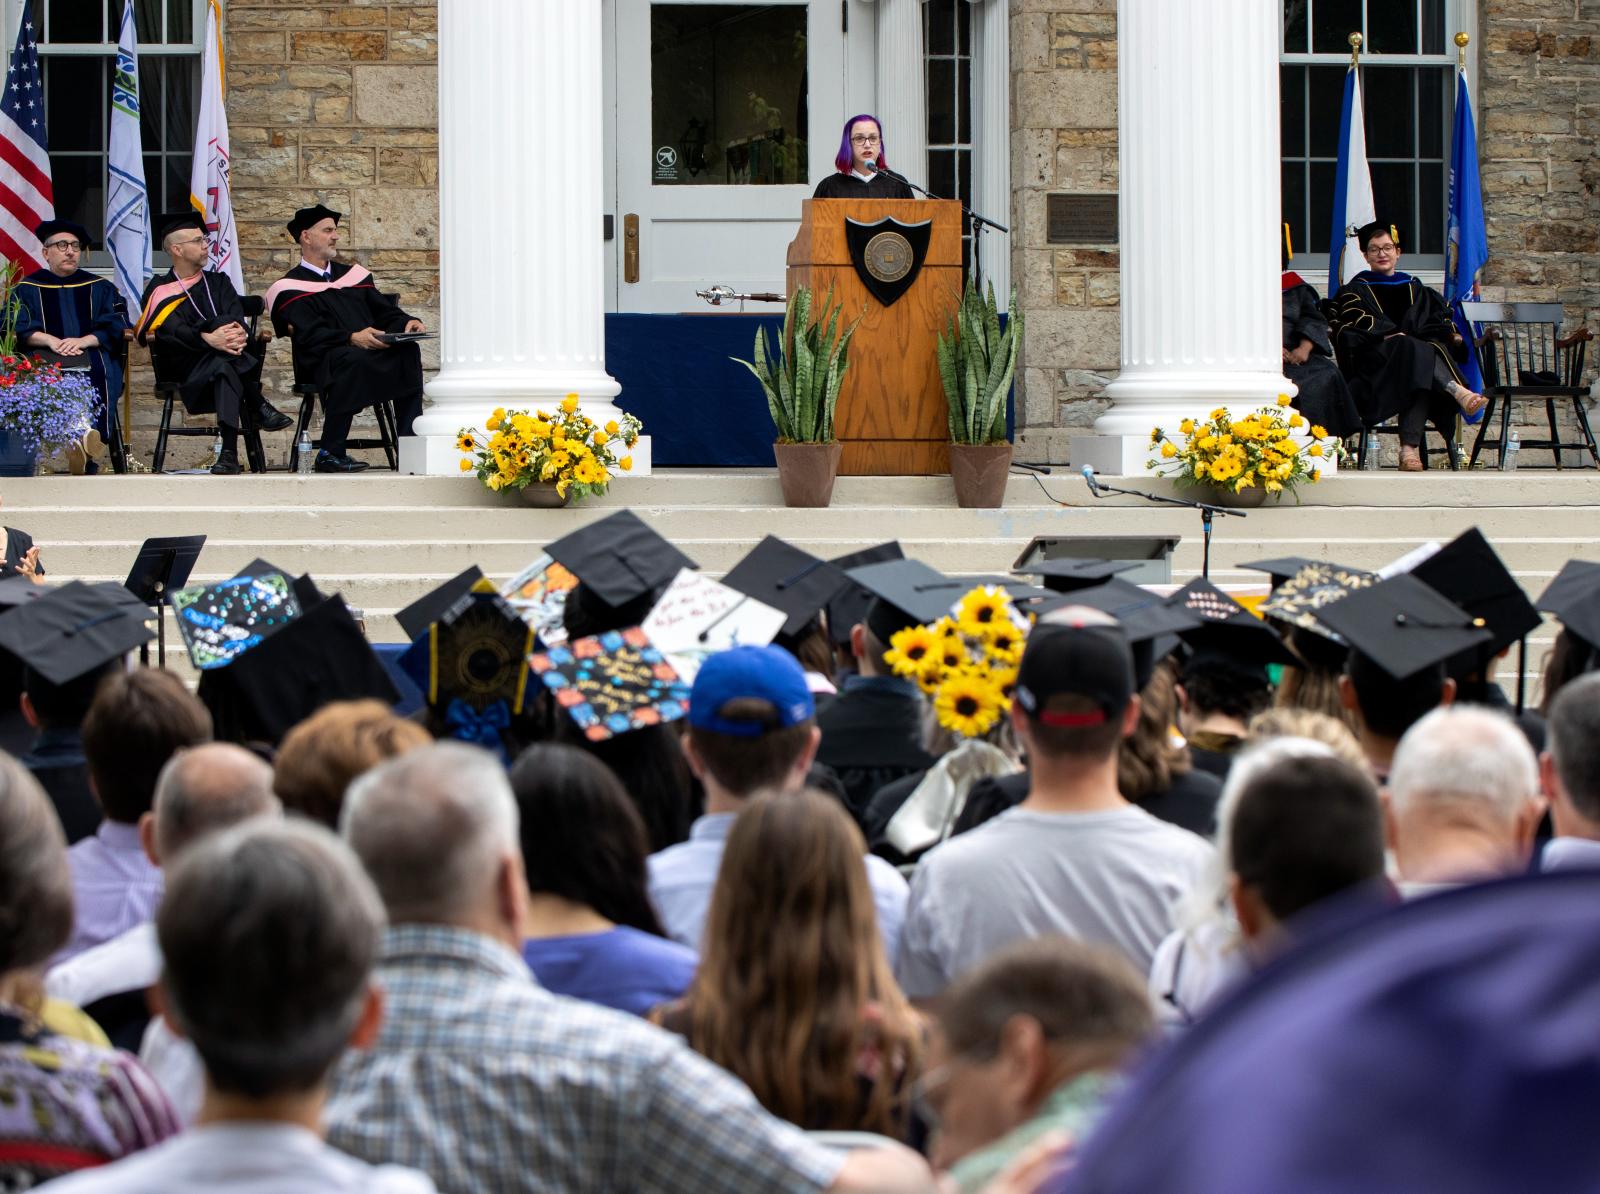 Helen Kramer stands at a podium on the steps of Main Hall while an audience of capped graduates watches.